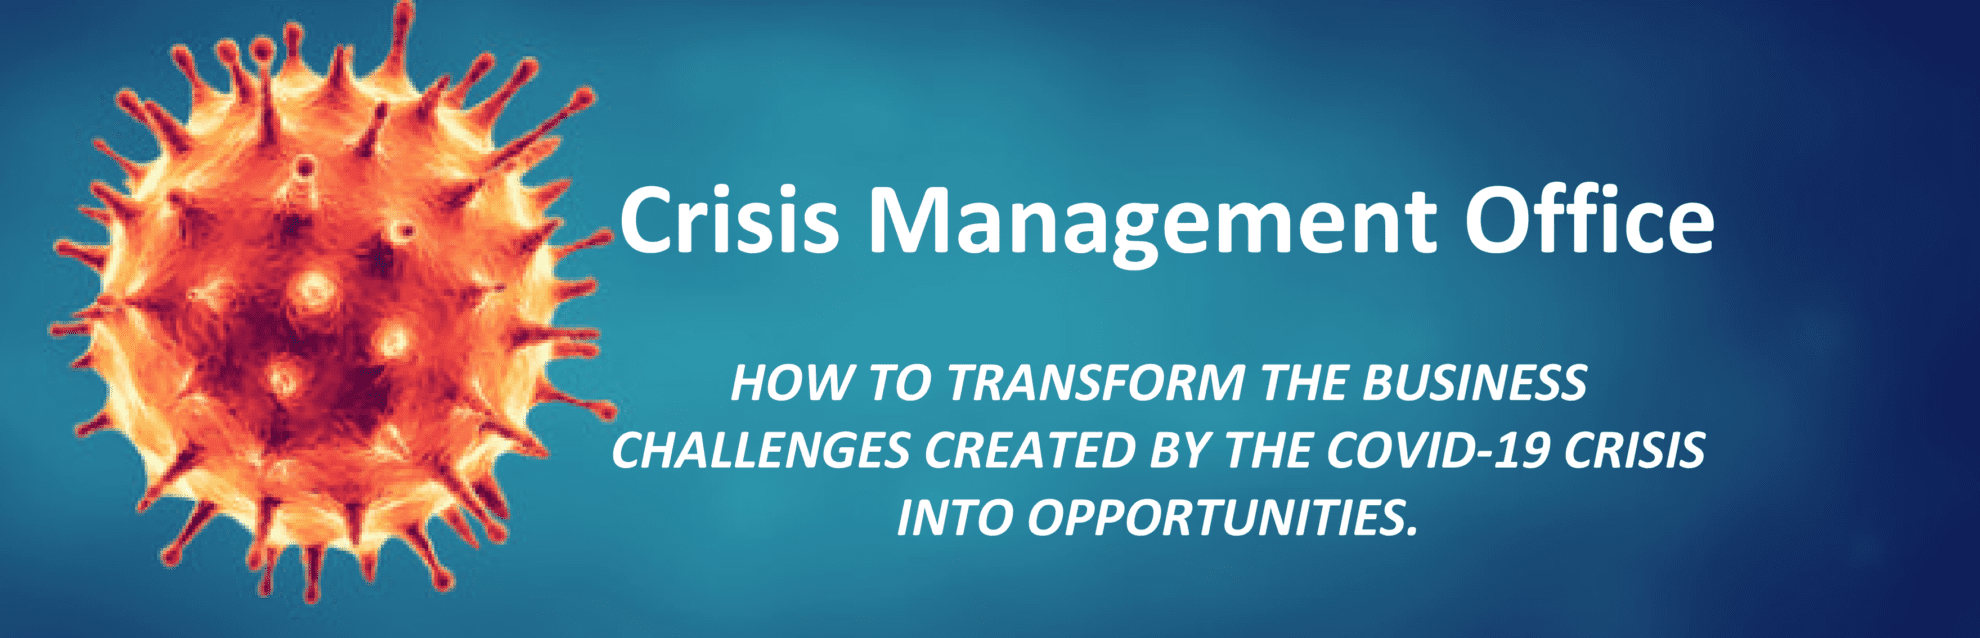 How To Transform The Business Challenges Created By The Covid-19 Crisis Into Opportunities.